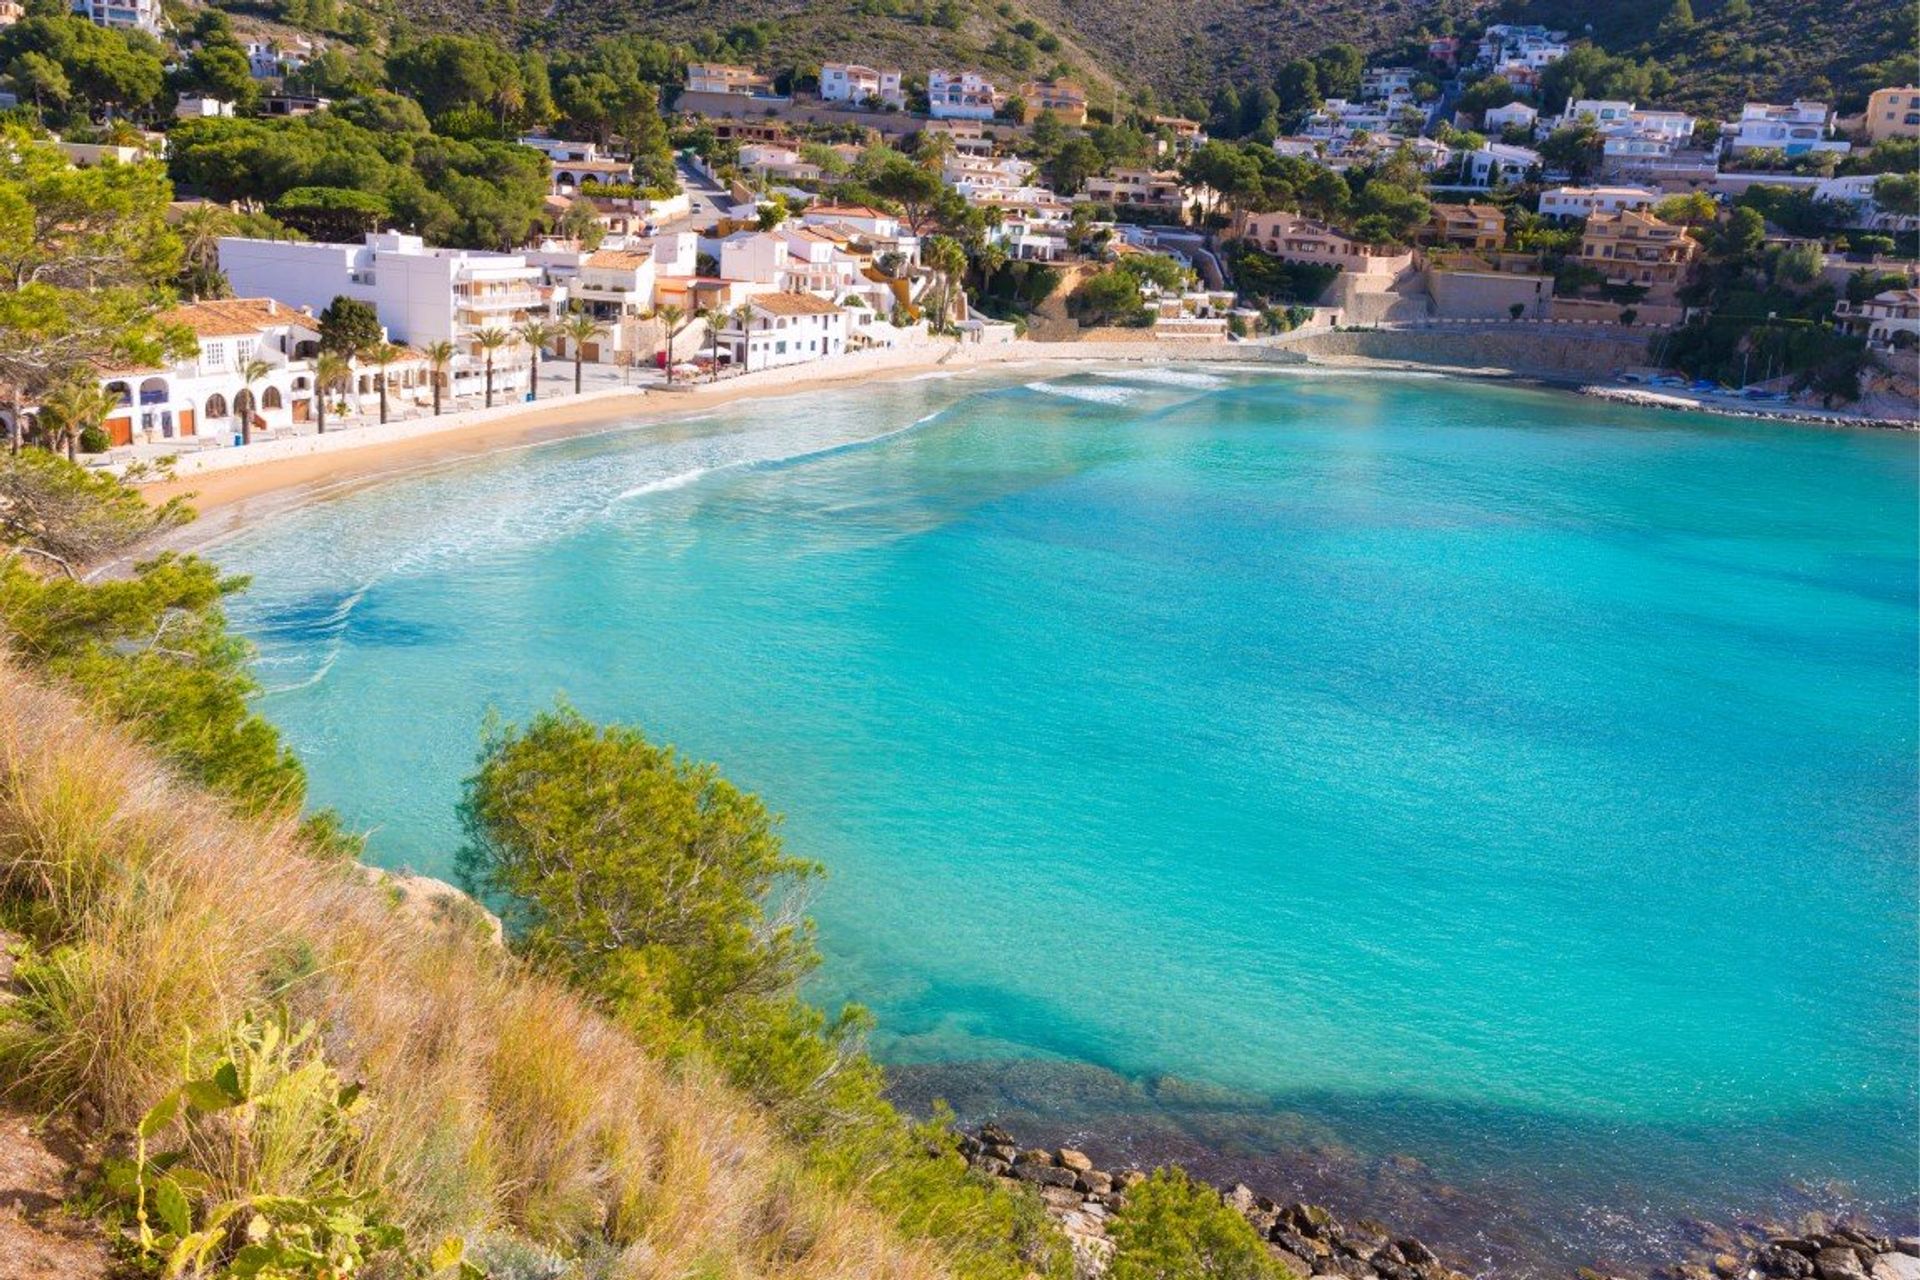 Blue Flag Playa El Portet beach is the perfect sport for families with its gently sloping sand 